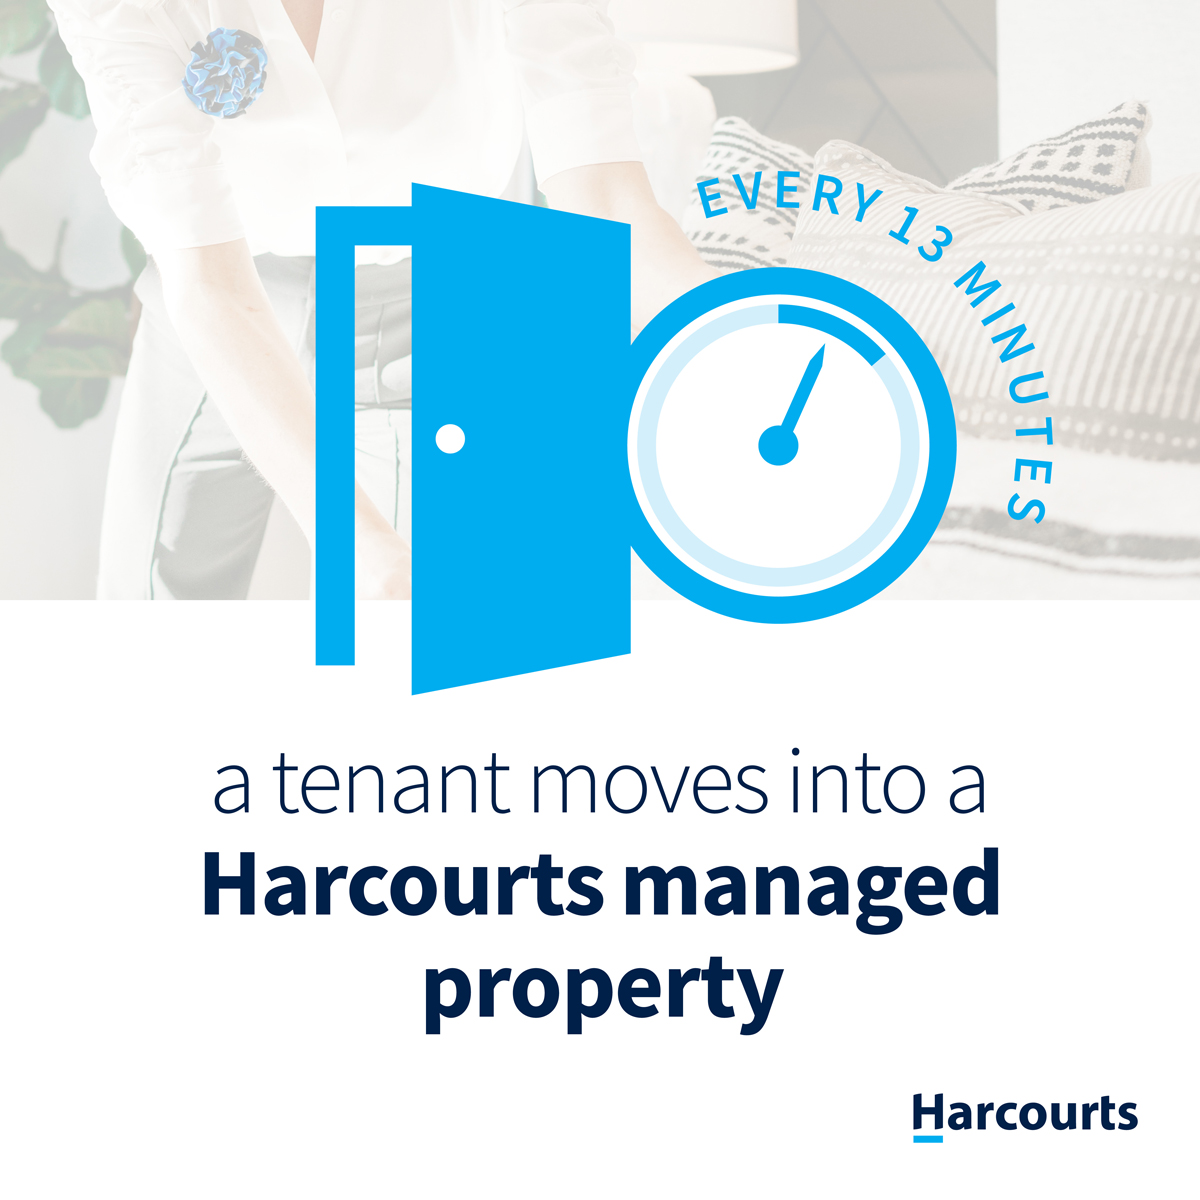 Every 13 minutes a tenant moves into a harcourts managed property.